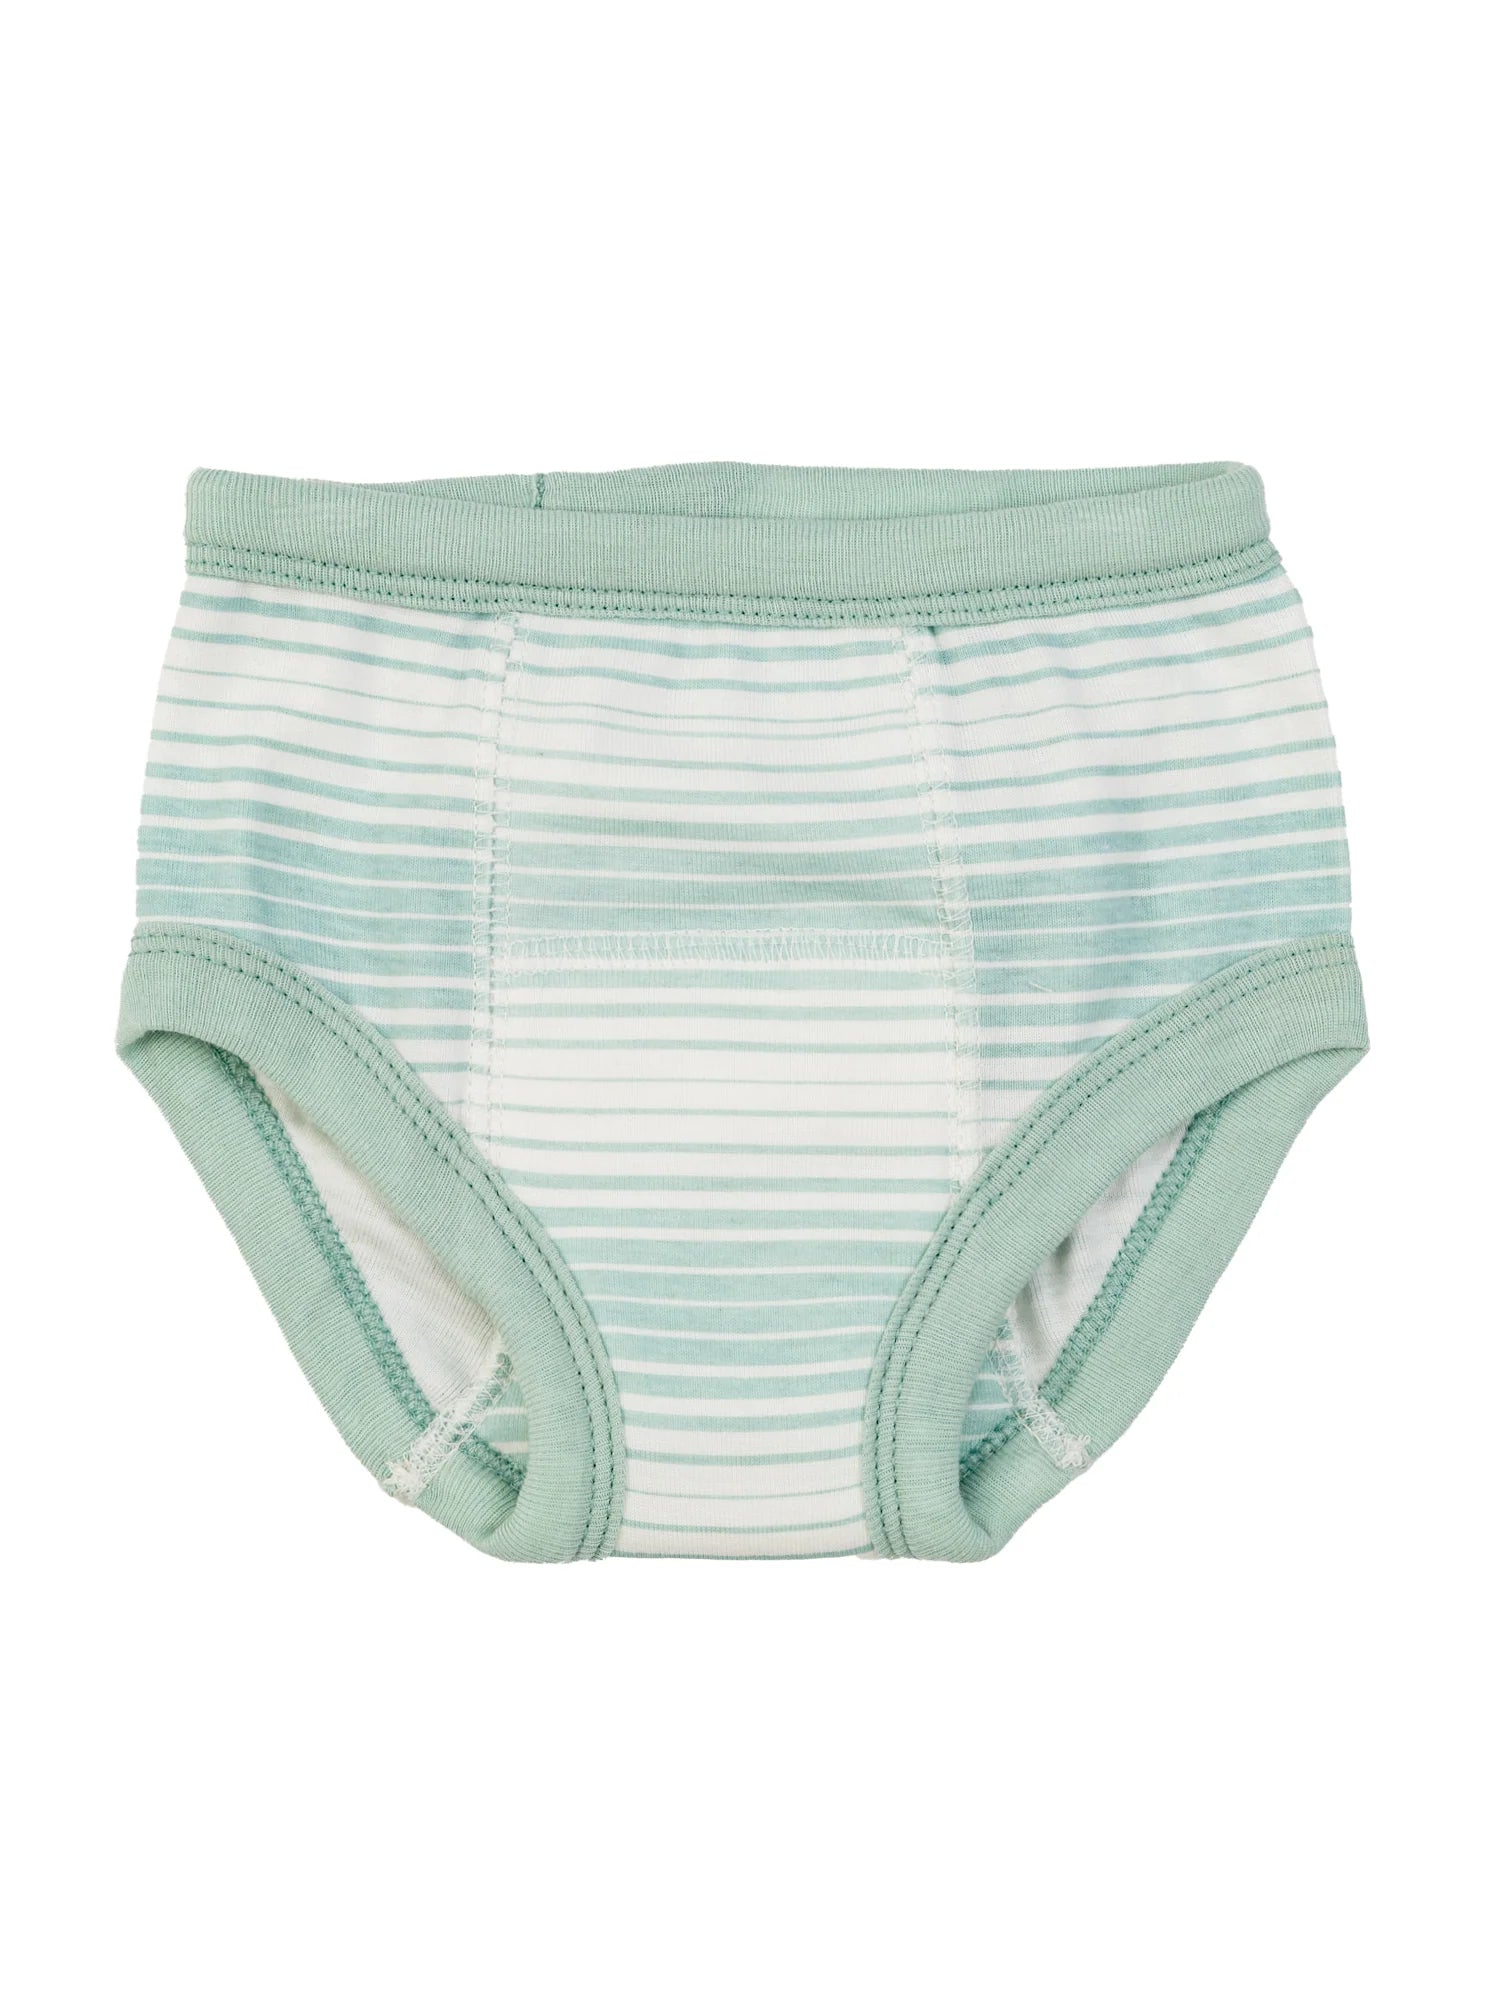 We recommend our Organic Cotton Training pants XKKO Organic - Baby Pink -  the goods are in stock. www.xkko.eu